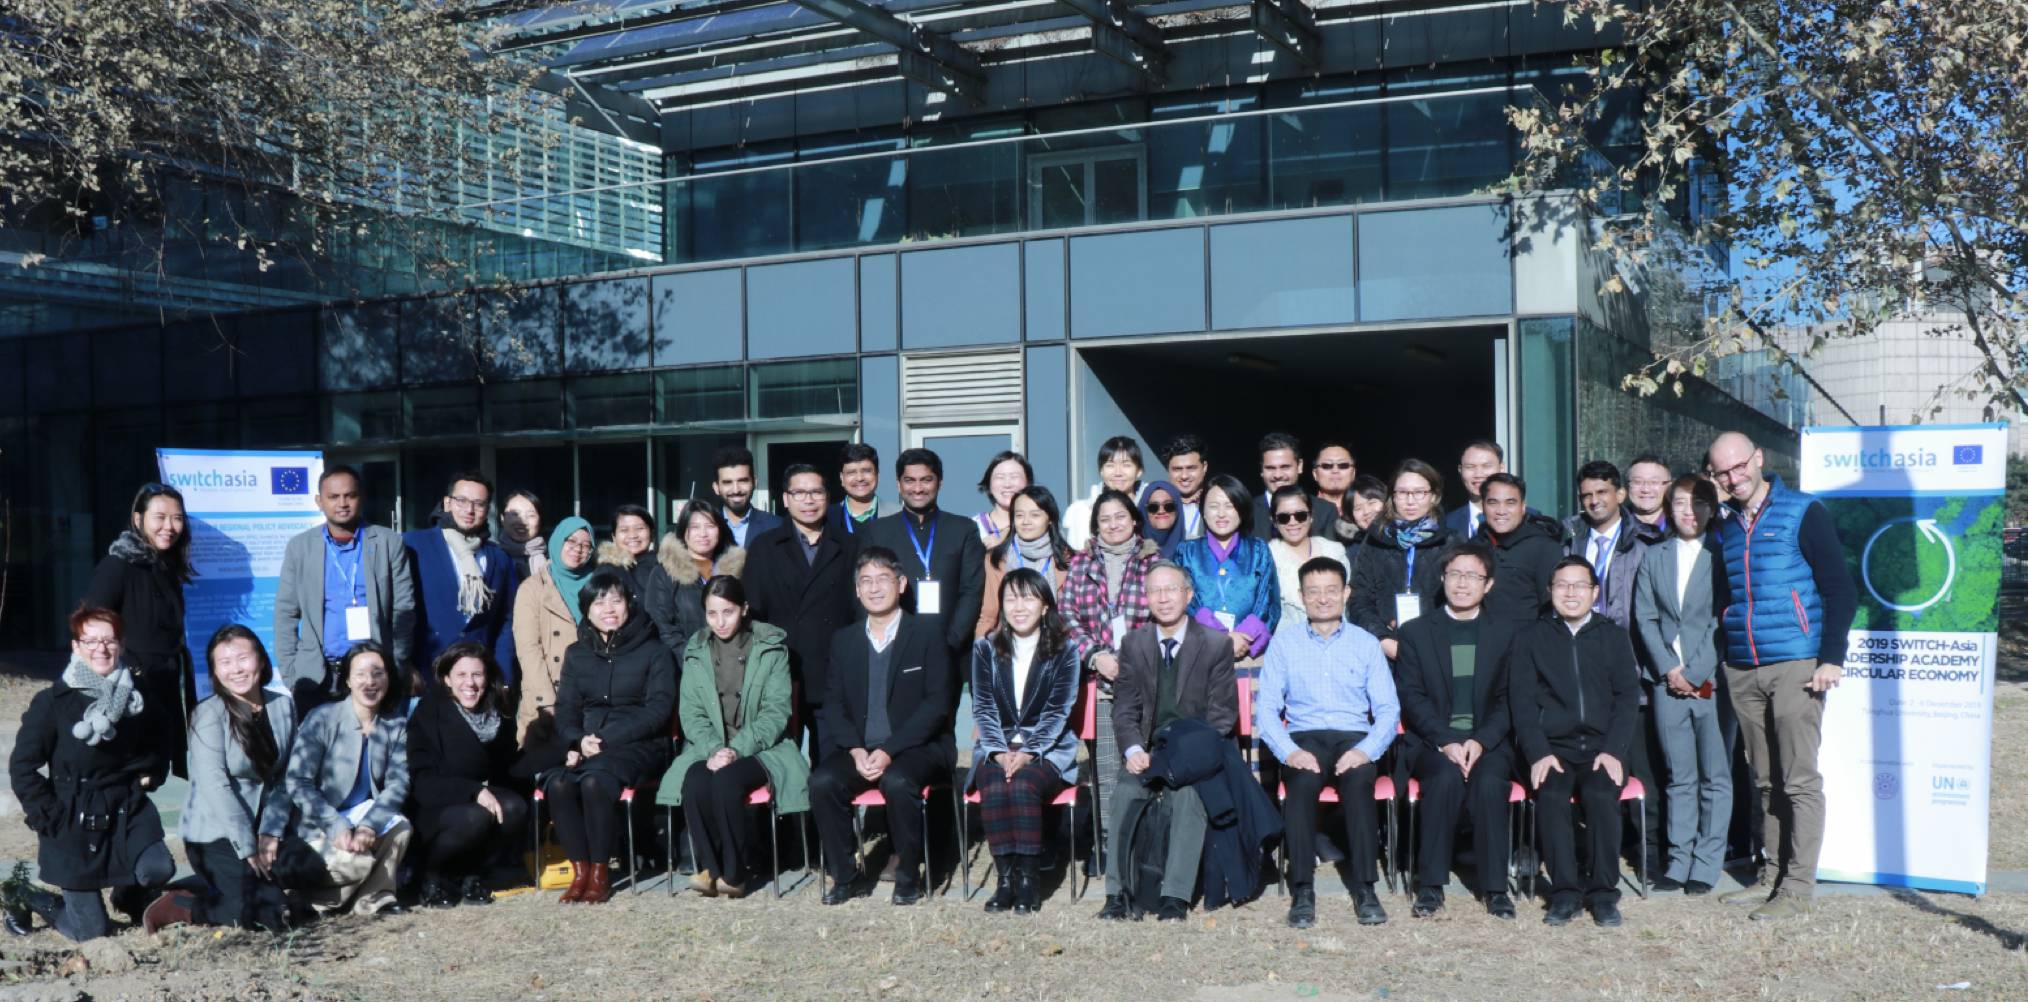 Press Release: SWITCH-Asia Leadership Academy on Circular Economy 2019